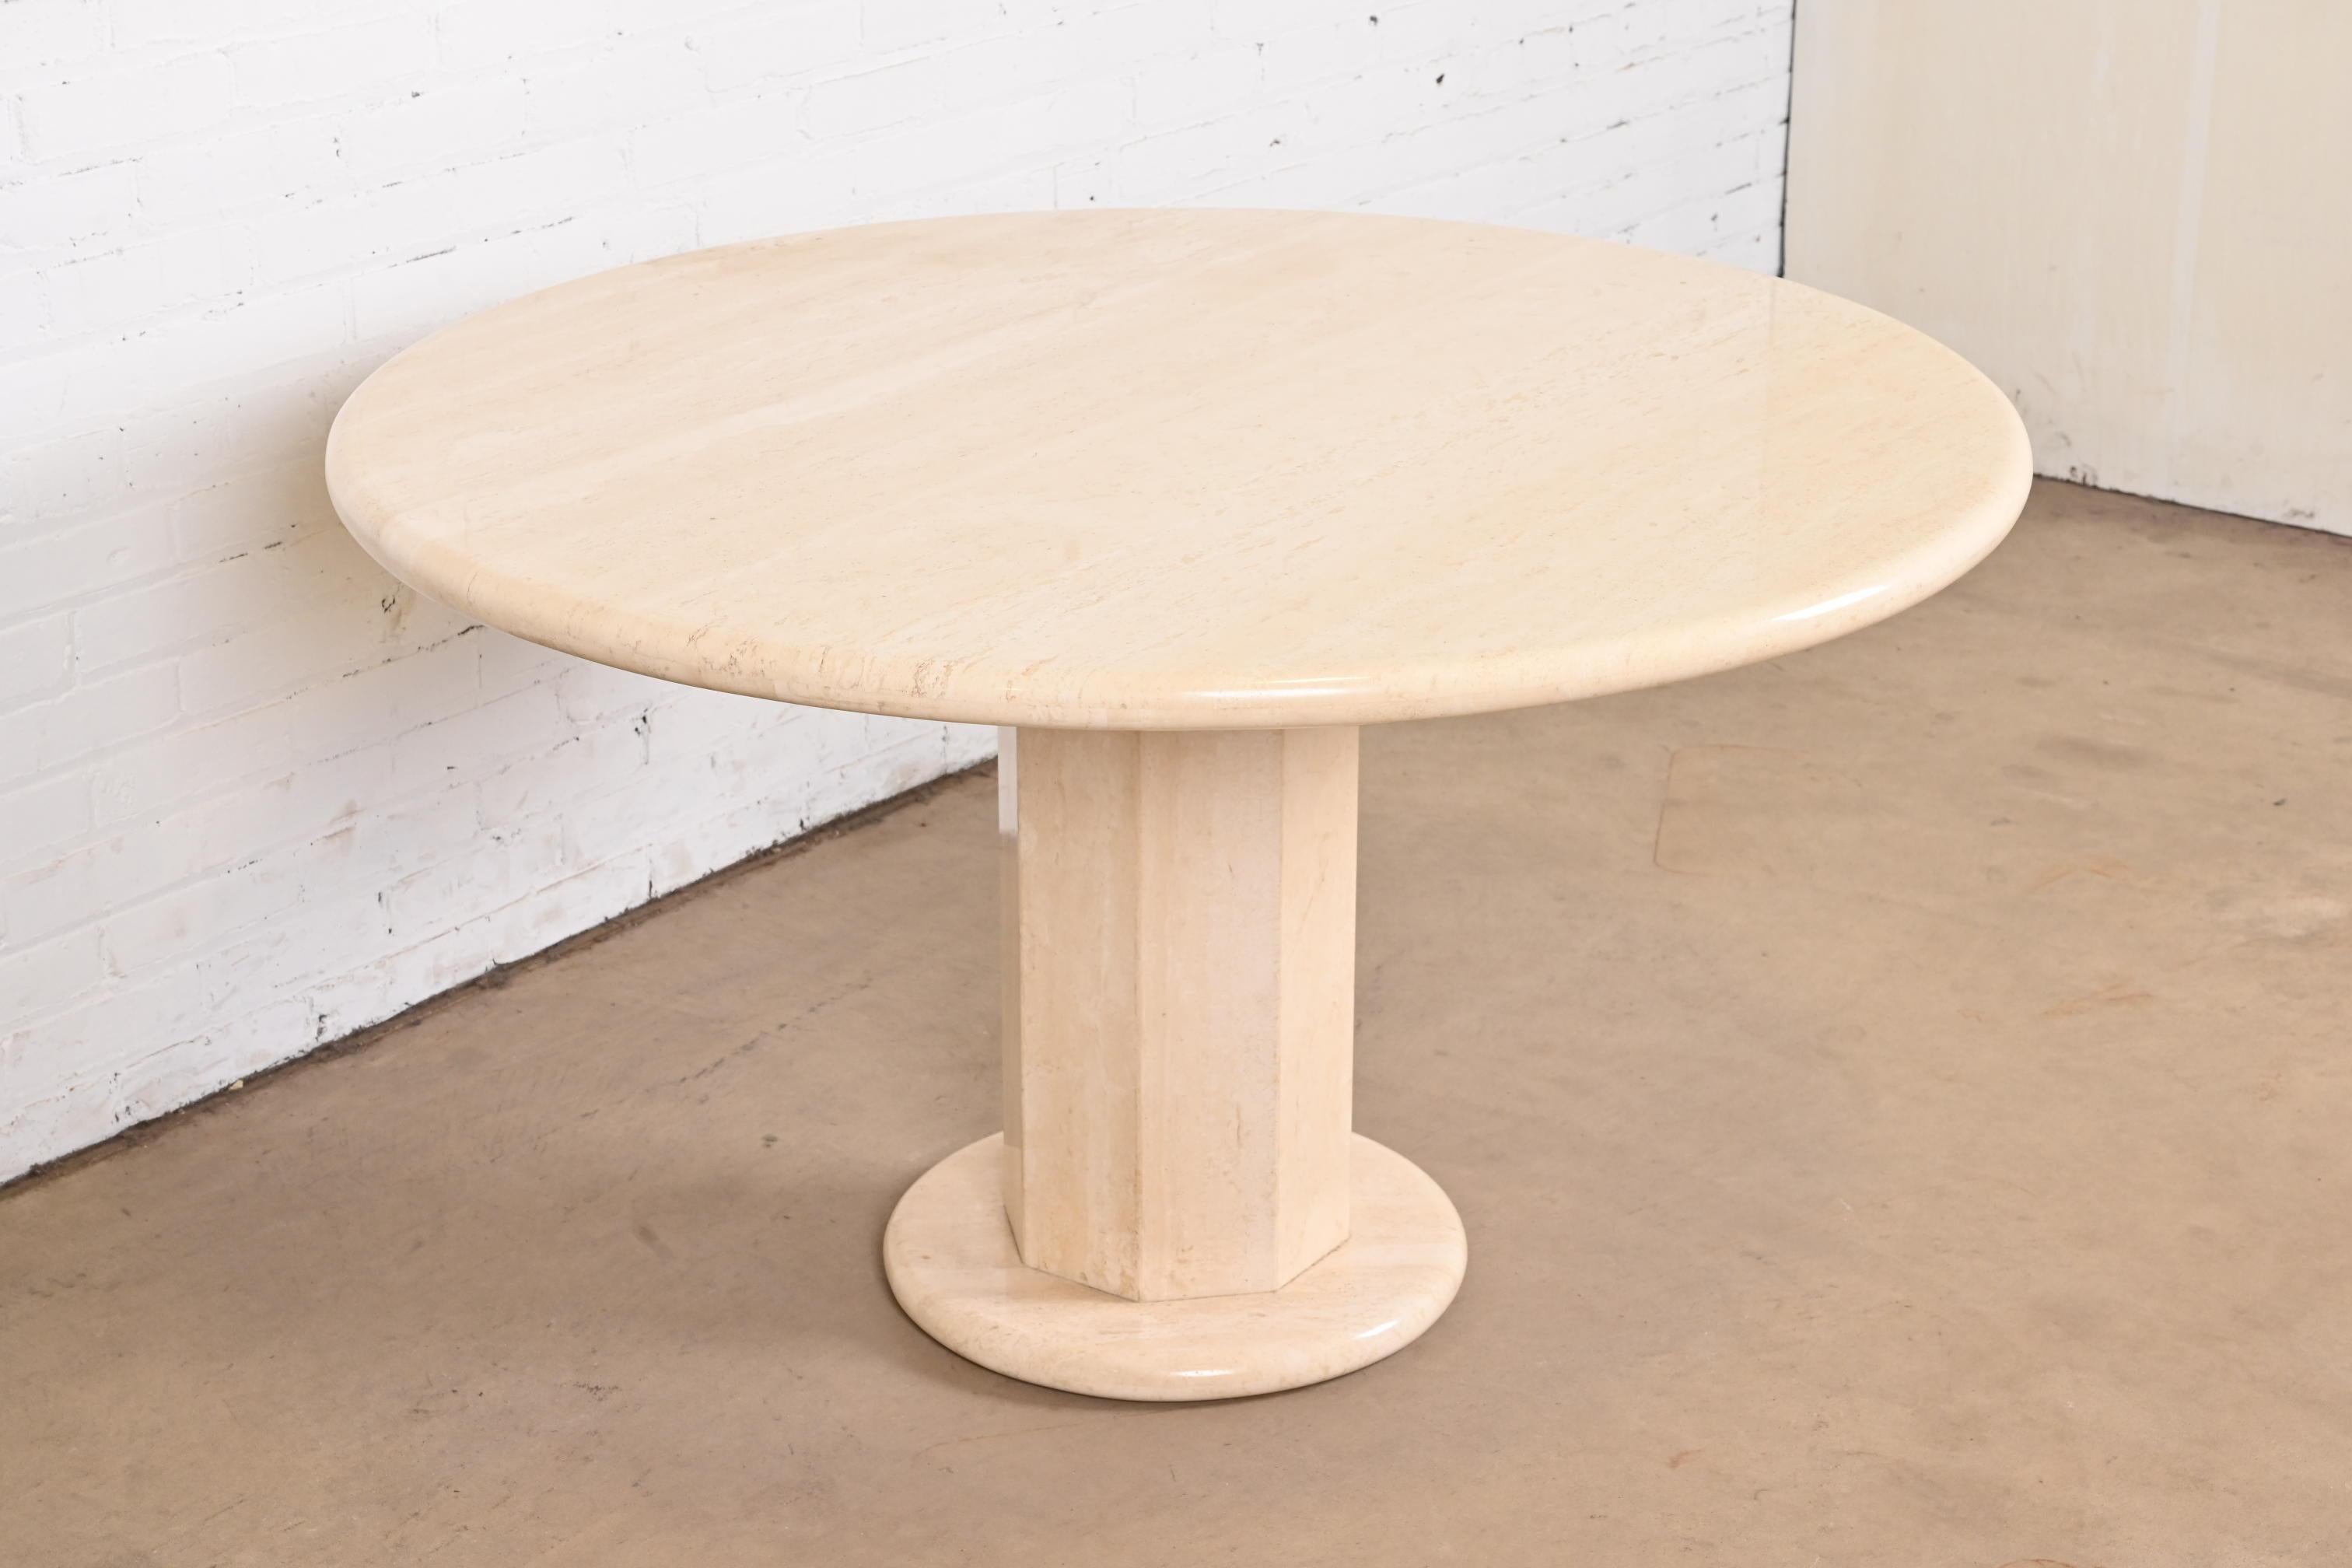 Modern Italian Travertine Round Pedestal Dining or Center Table by Ello, 1970s For Sale 1